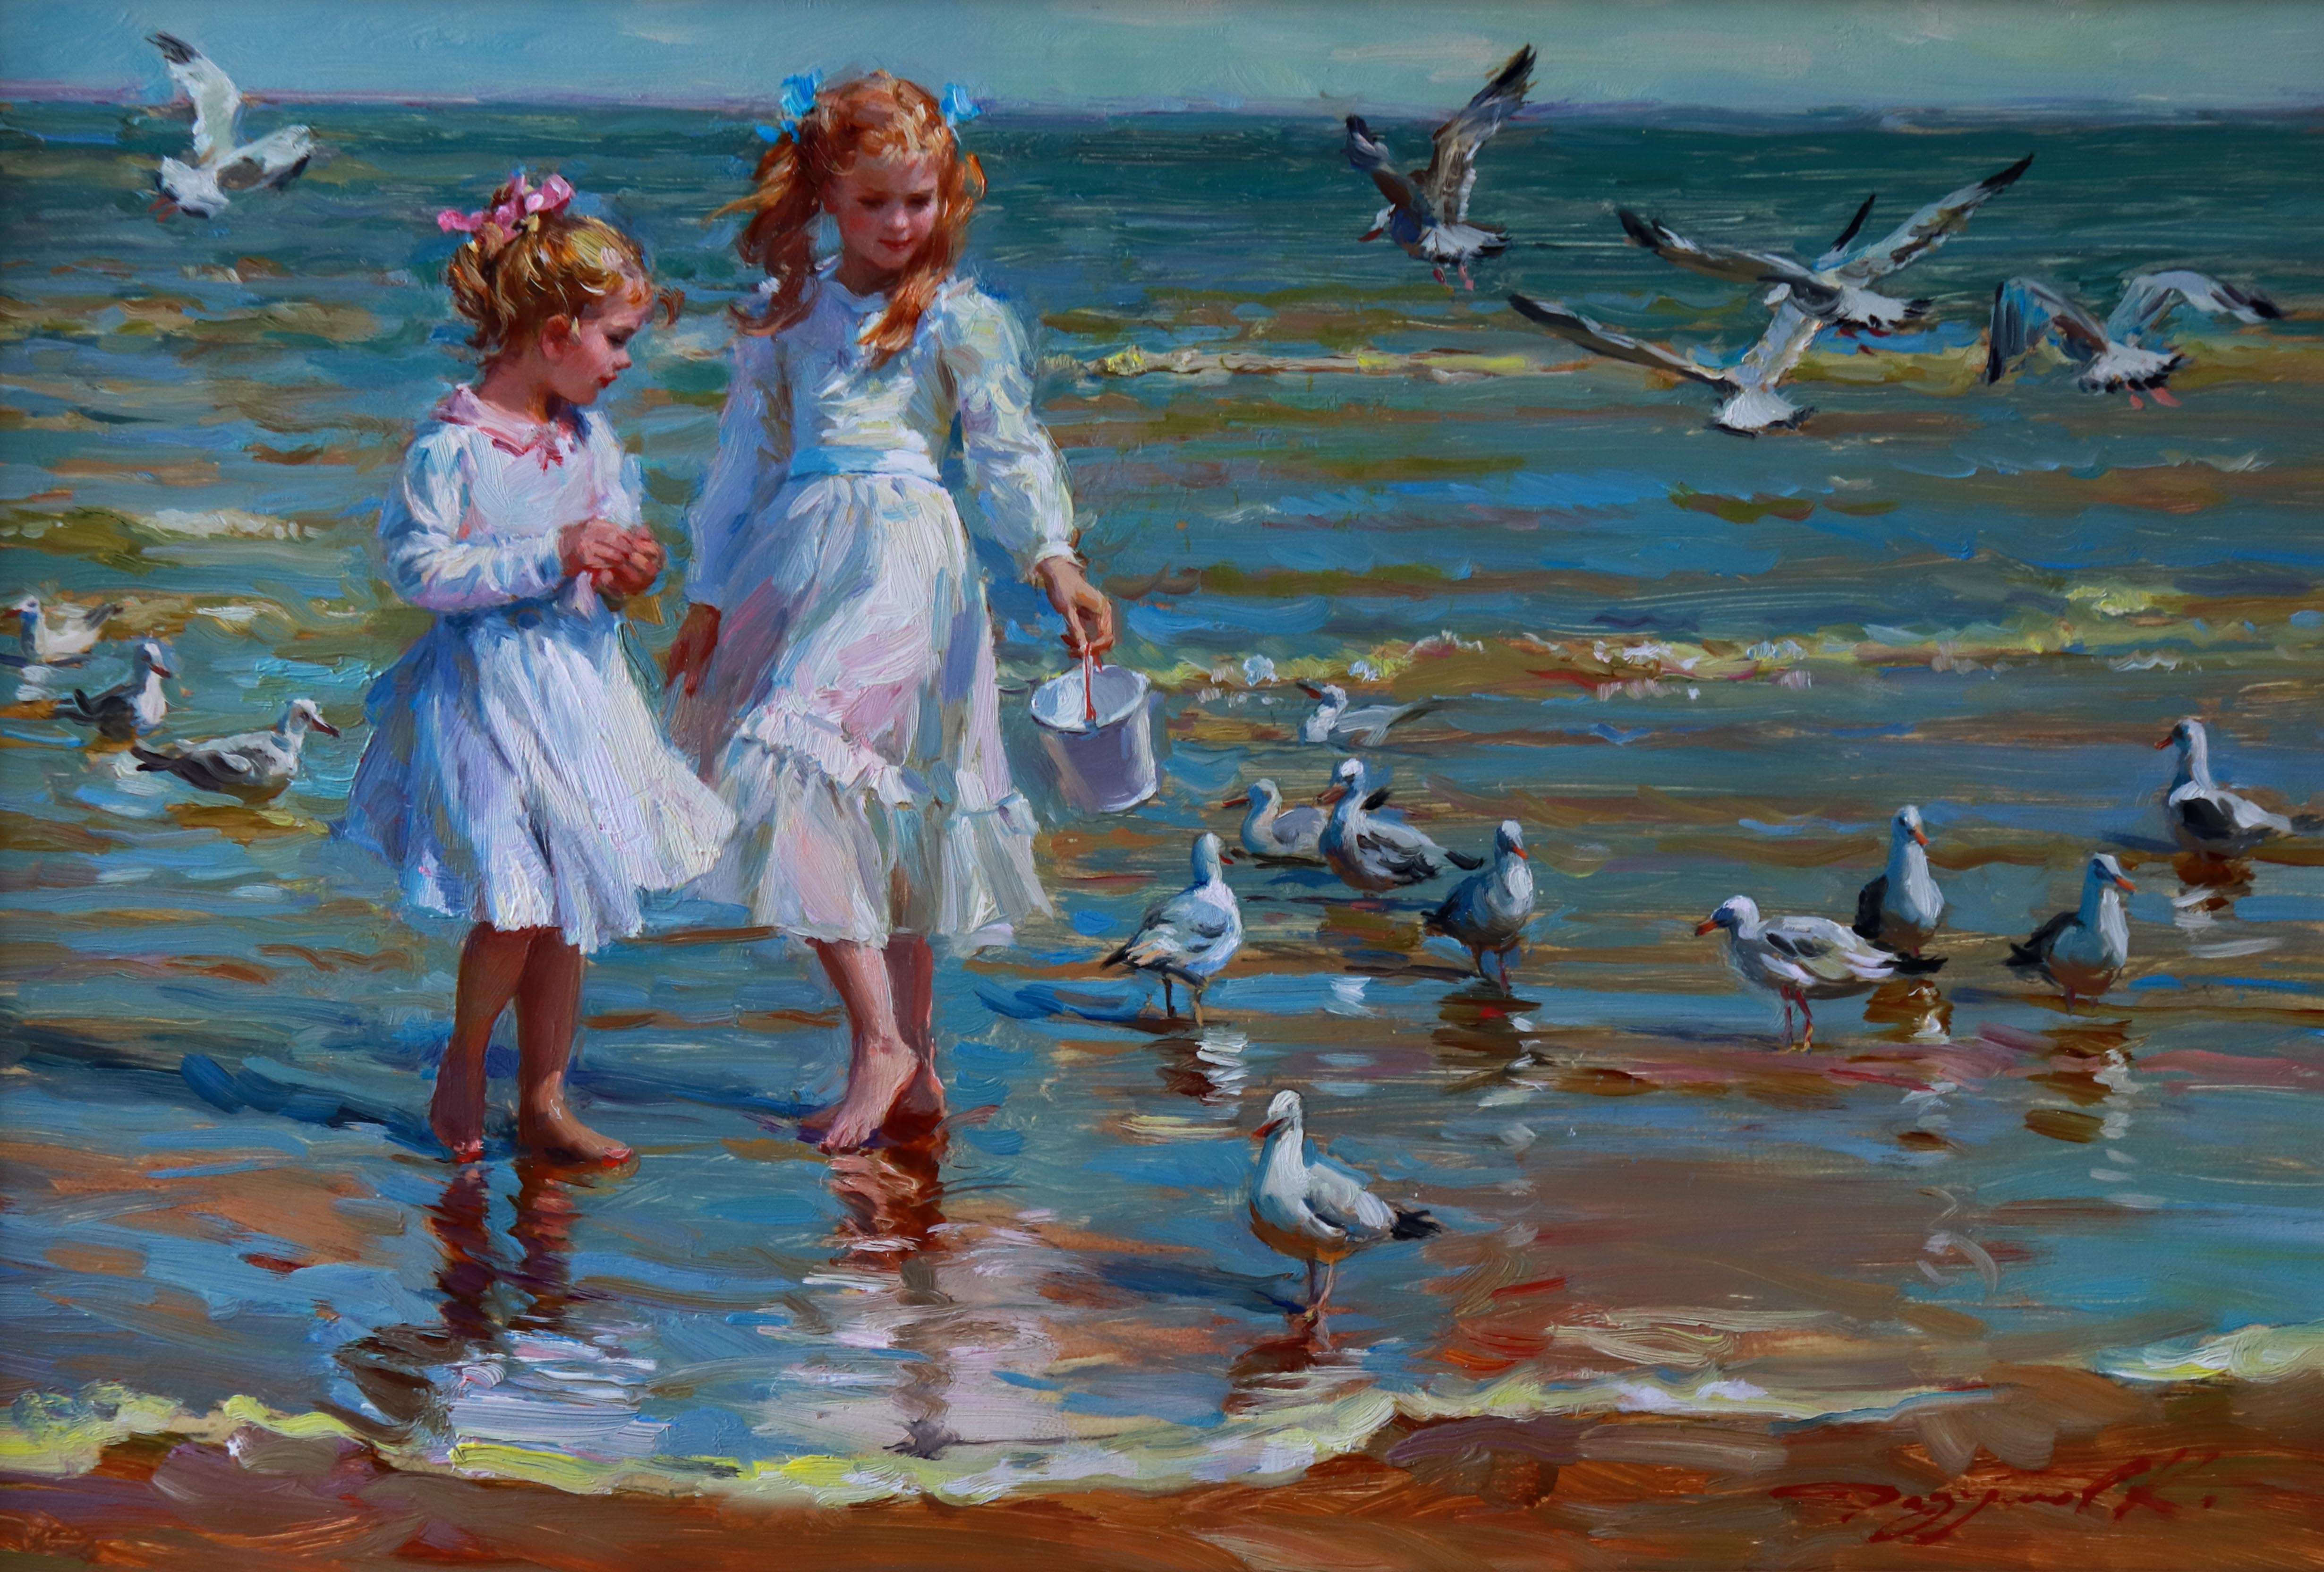 Konstantin Razumov (1974- ) Russian. "The Seagulls", Two Young Girls on a Beach, with Seagulls,